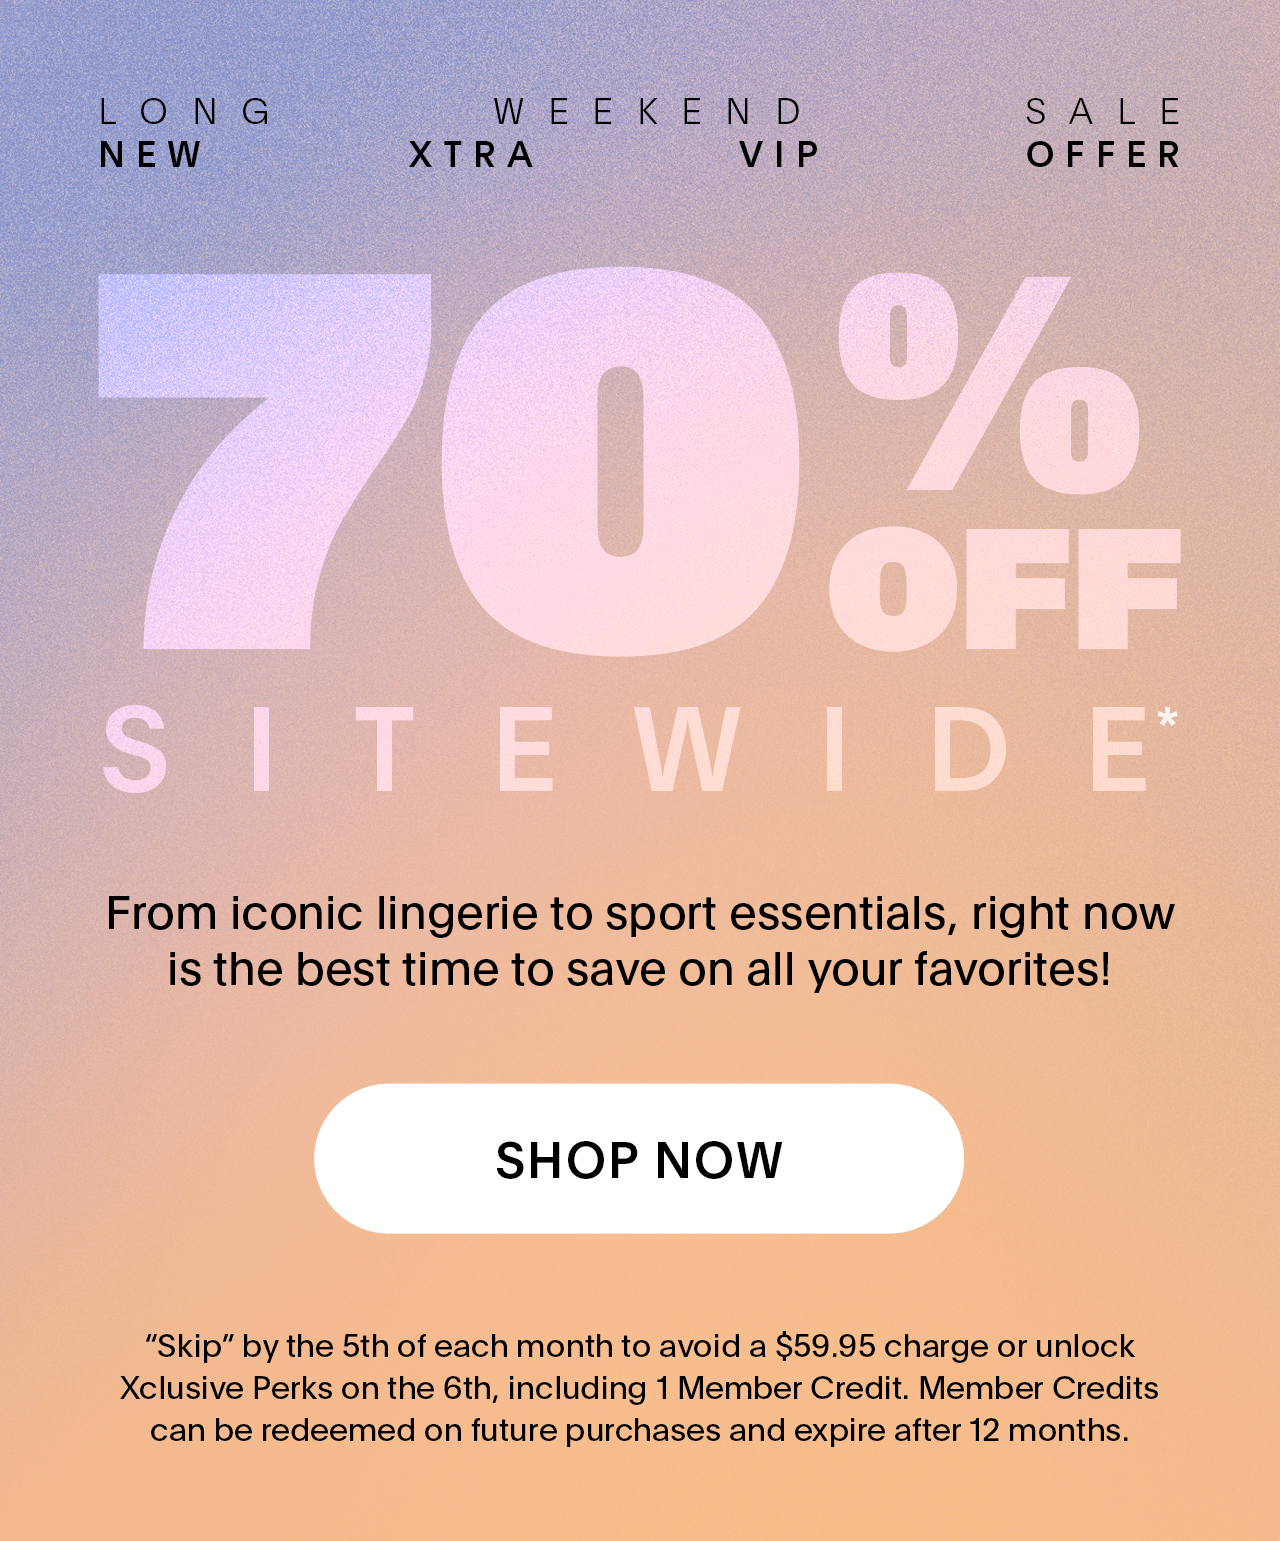 Long Weekend Sale New Xtra VIP Offer 70% OFF Sitewide* 